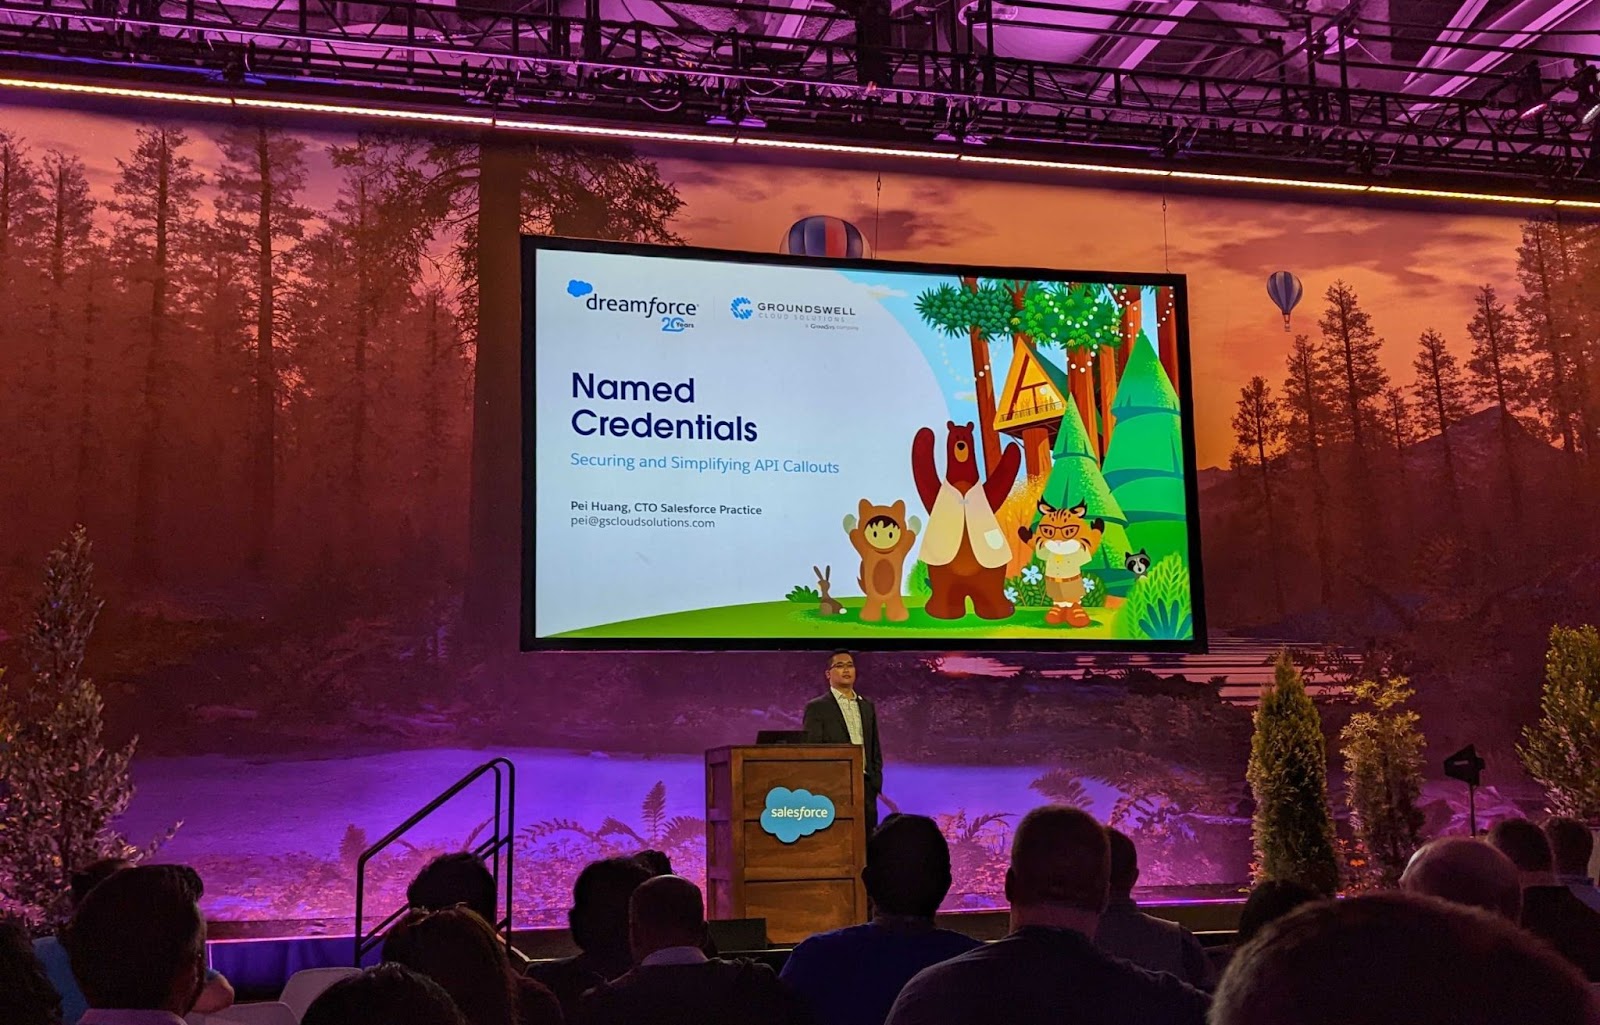 Pei Huang presenting on Named Credentials: Securing and Simplifying API Callouts at Dreamforce 2022